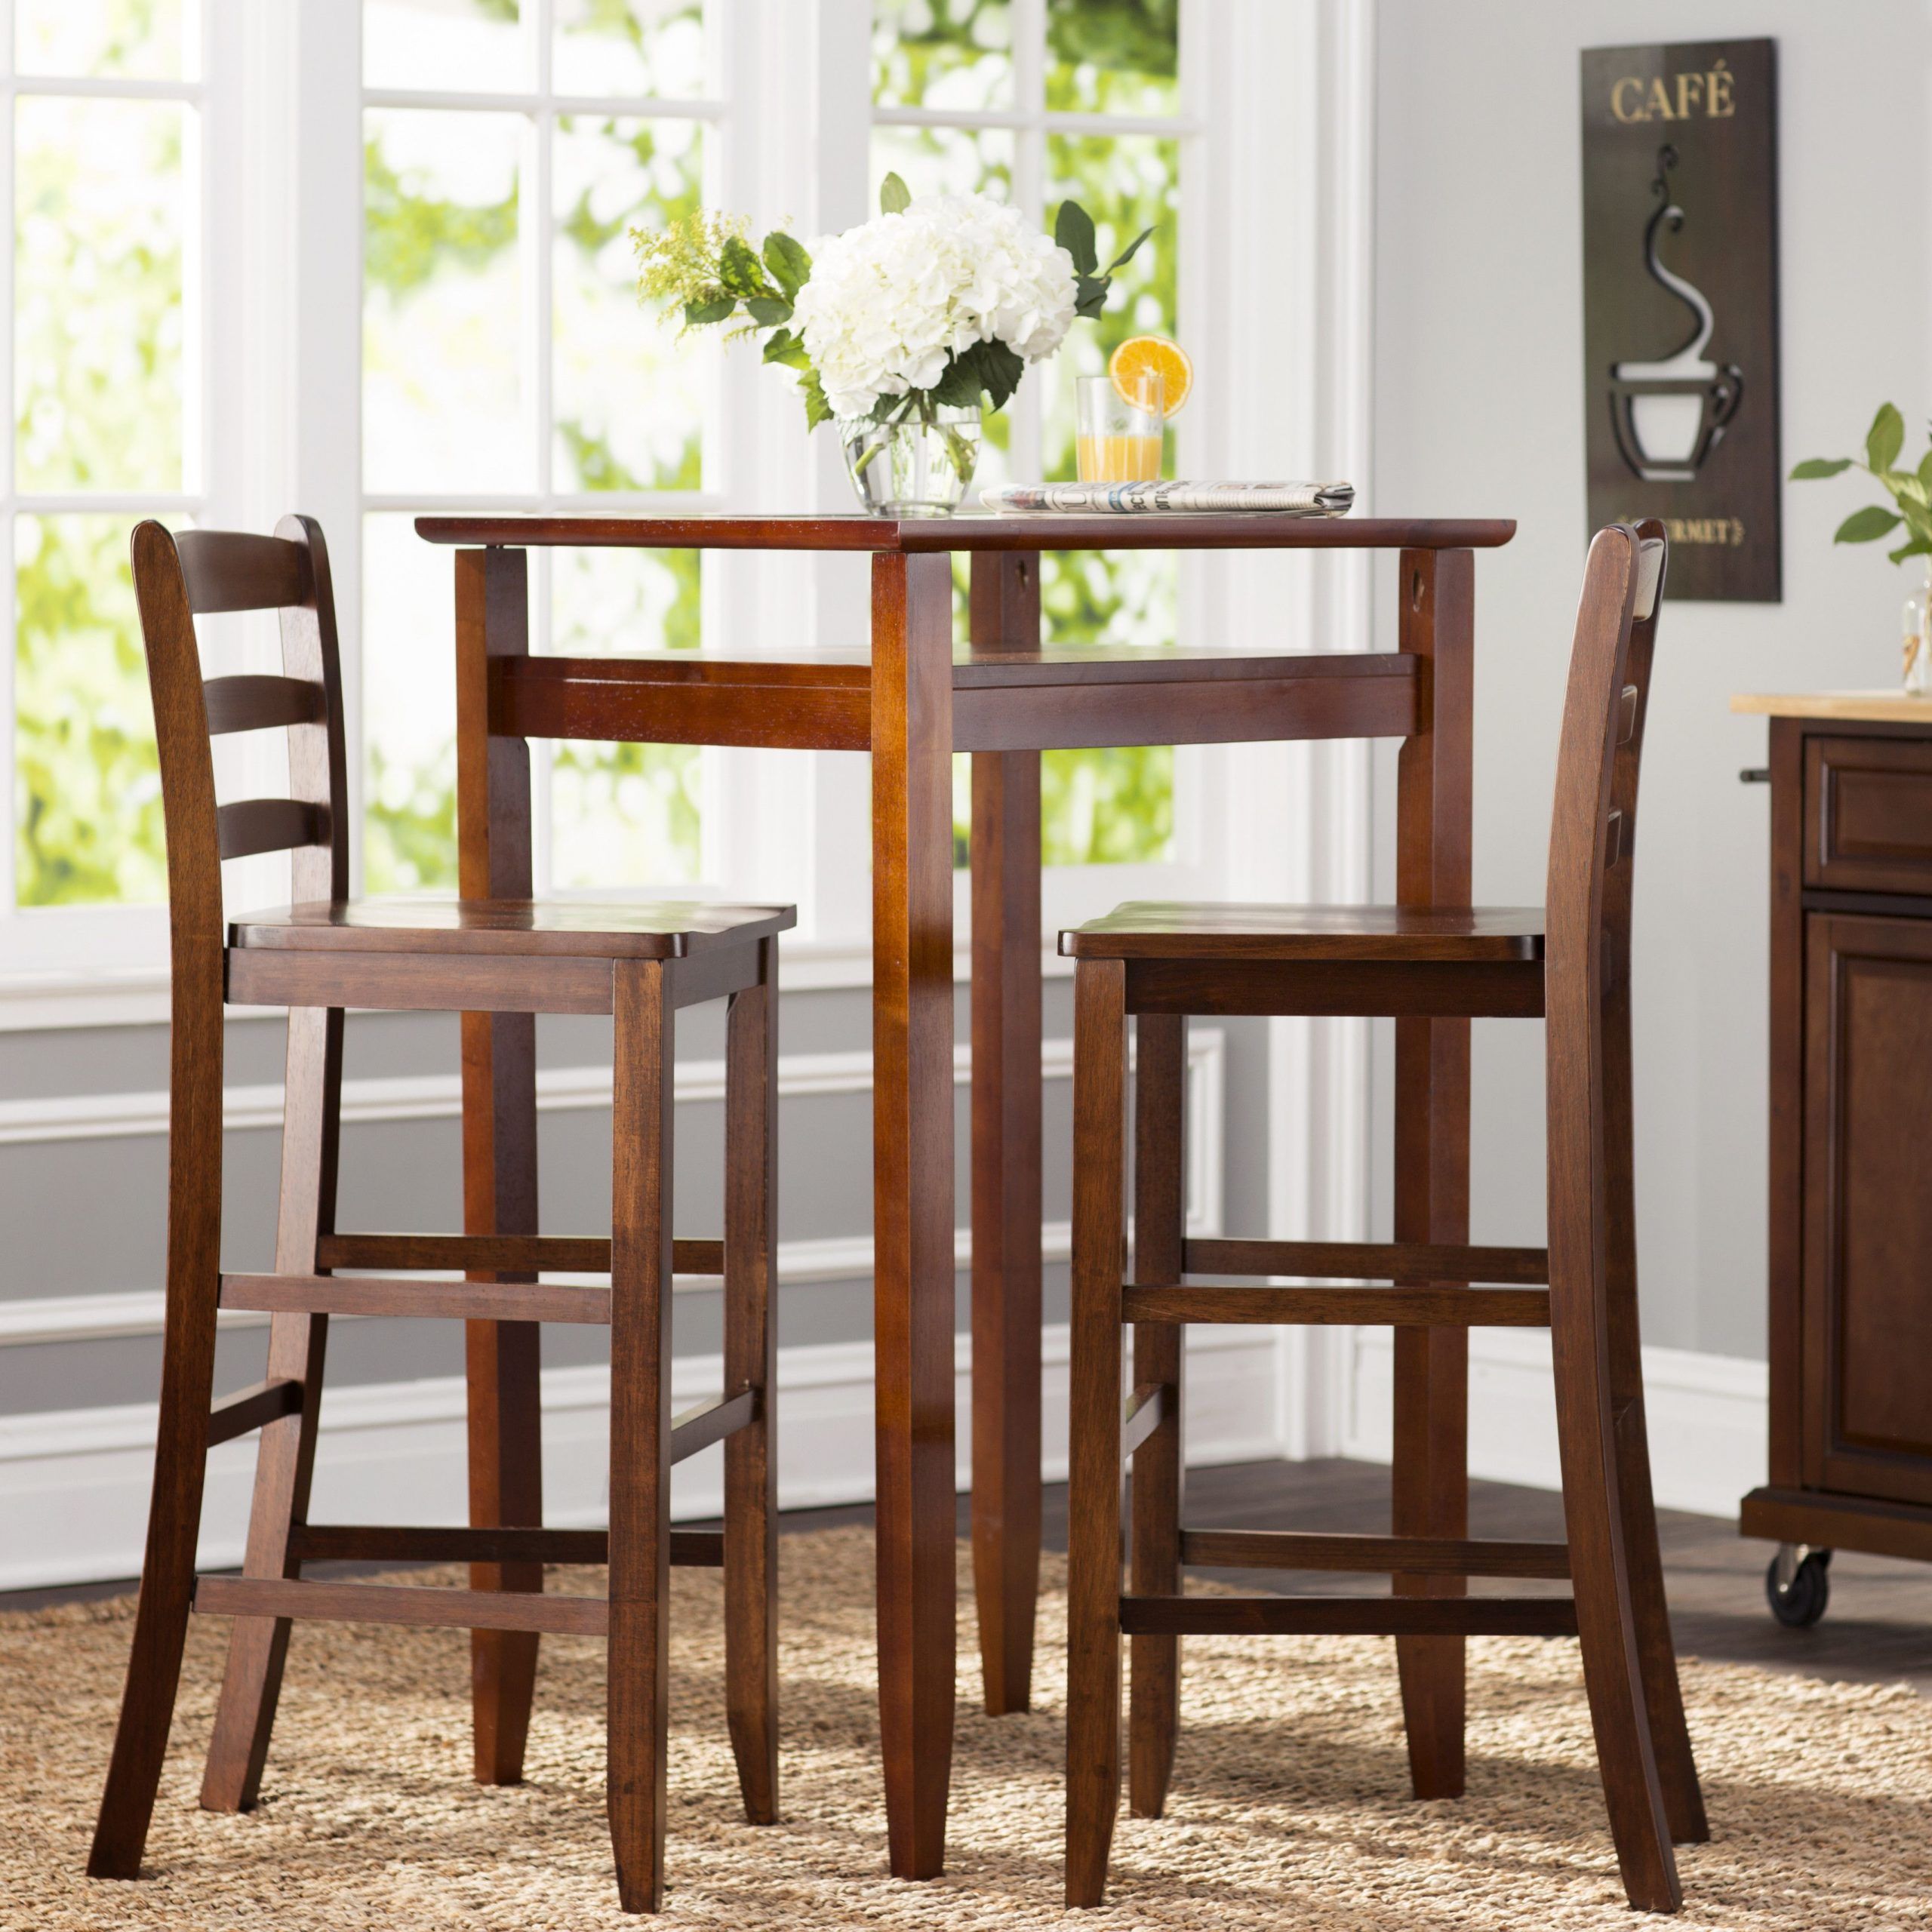 Charlton Home Halo 3 Piece Pub Table Set | Pub Table Sets, Bar Table Pertaining To 3 Piece Bistro Dining Sets (View 6 of 15)